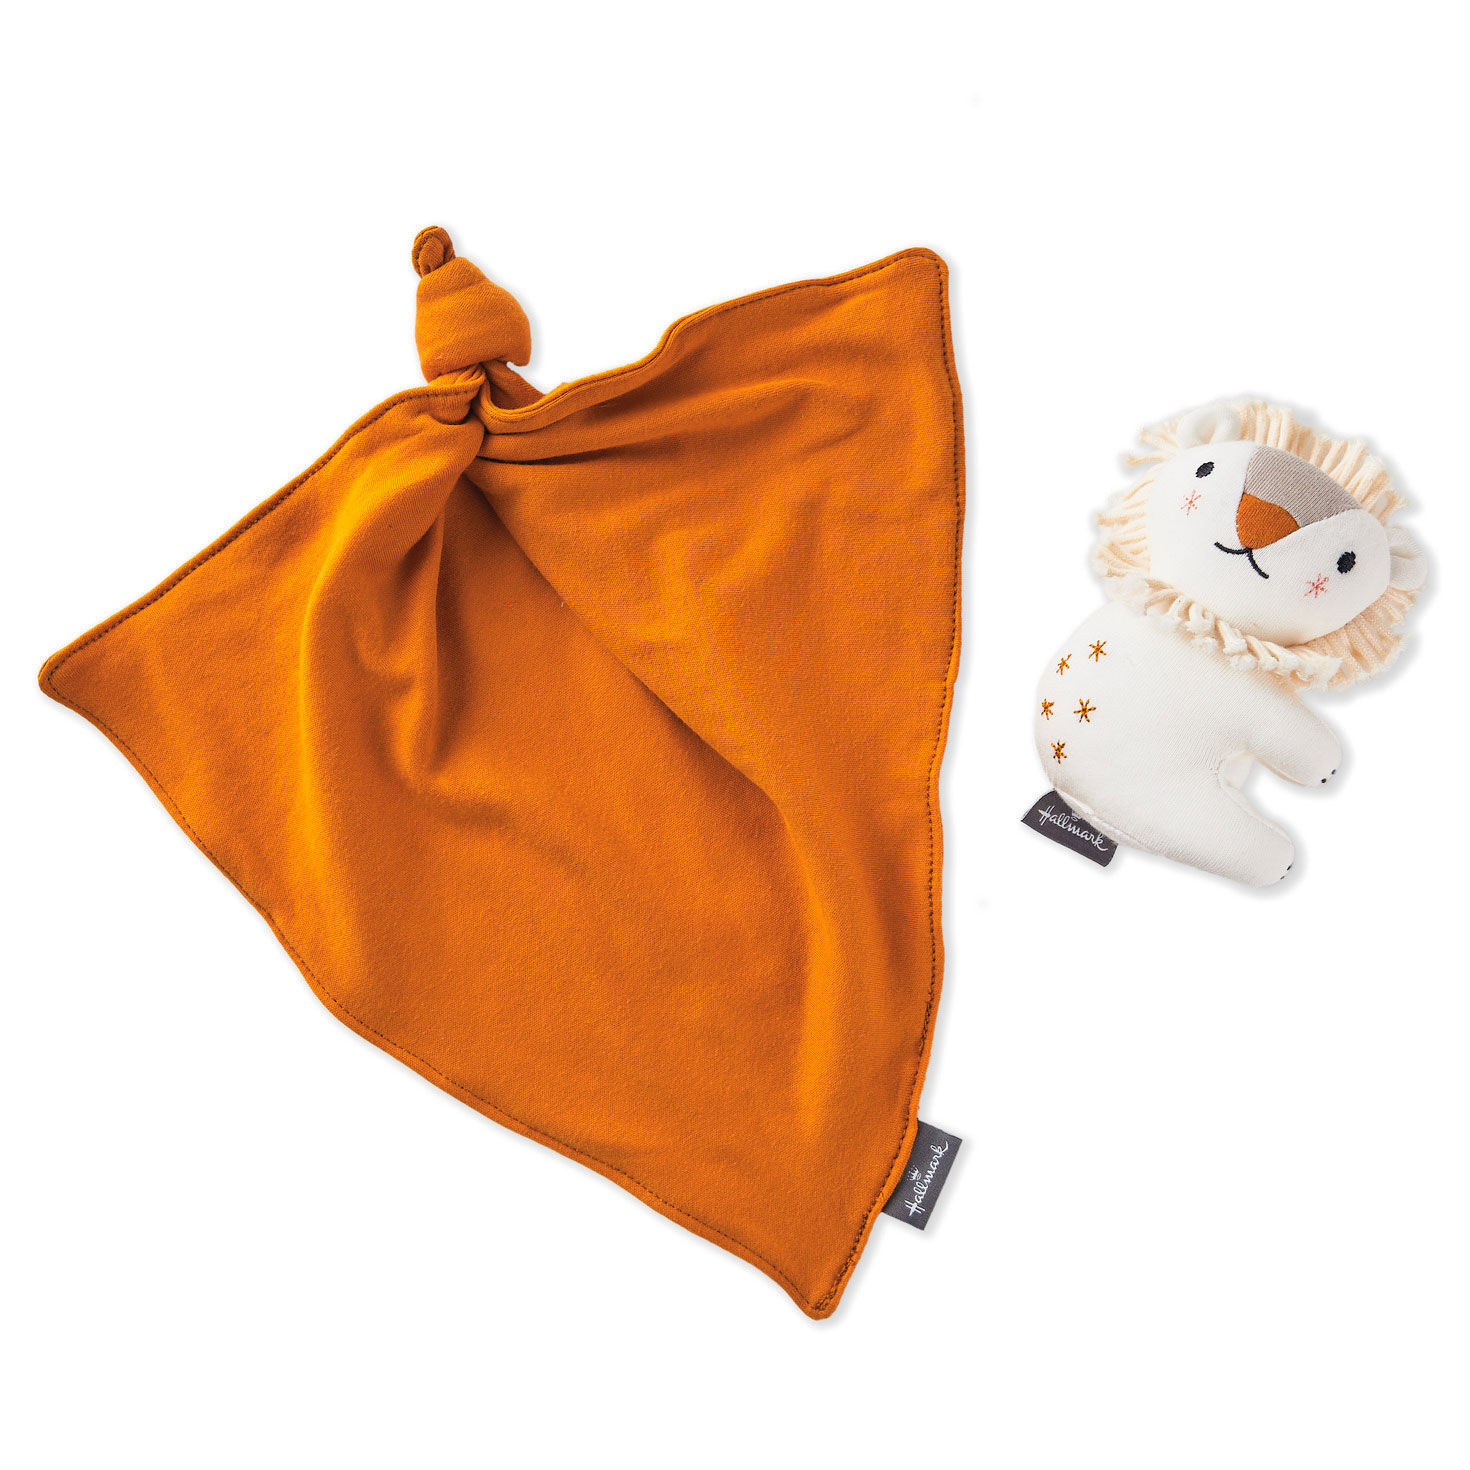 The Lion and the Mouse Board Book and Lion Lovey Blanket Set for only USD 24.99 | Hallmark